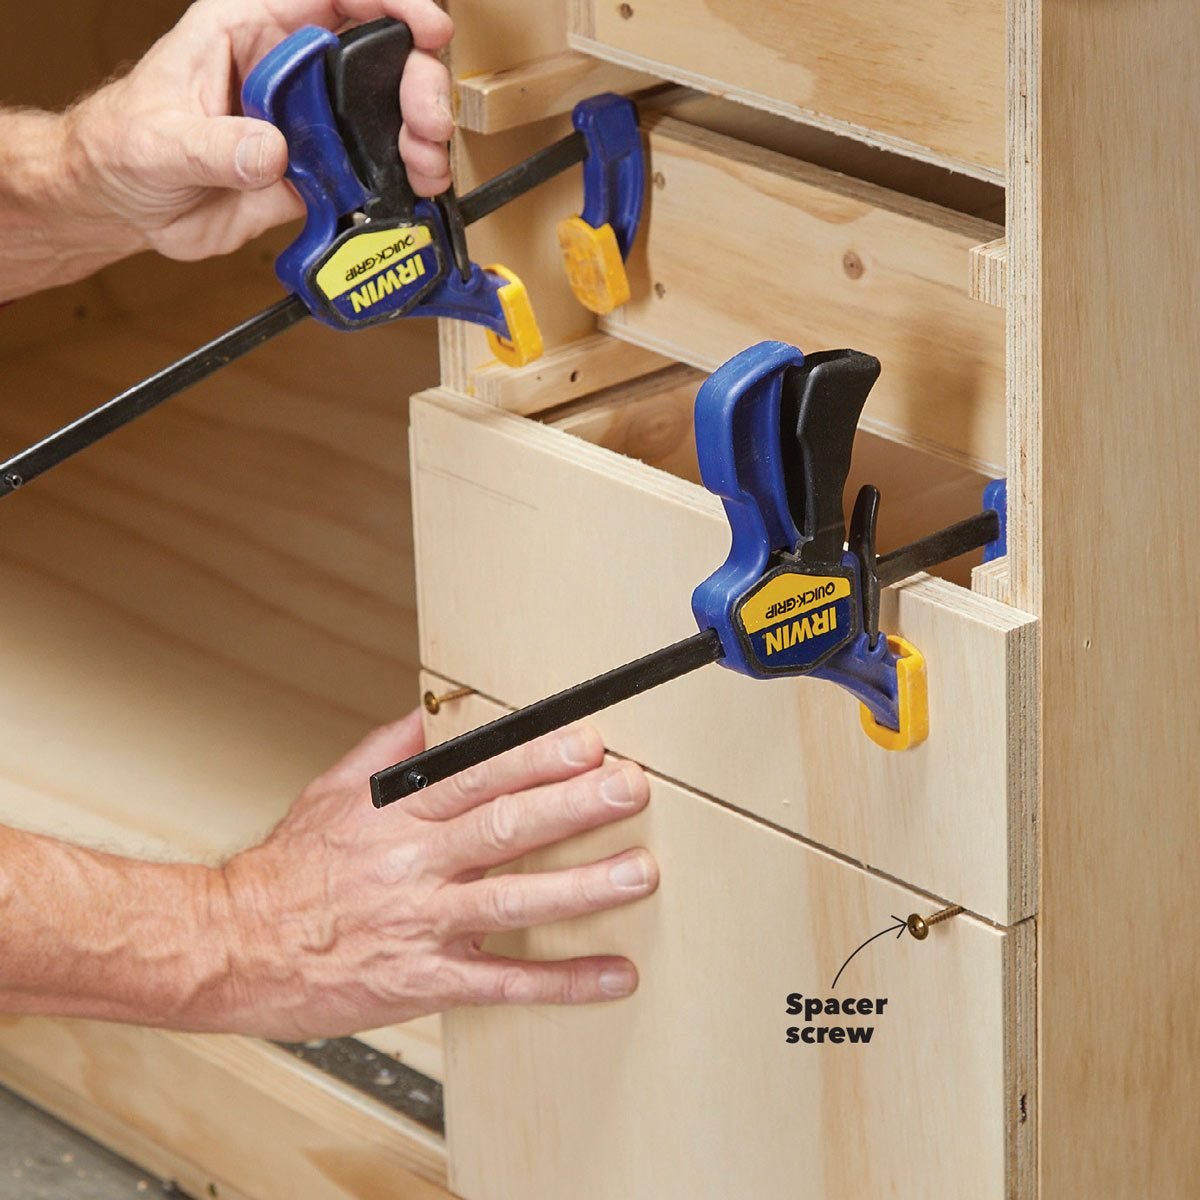 Install the drawer fronts